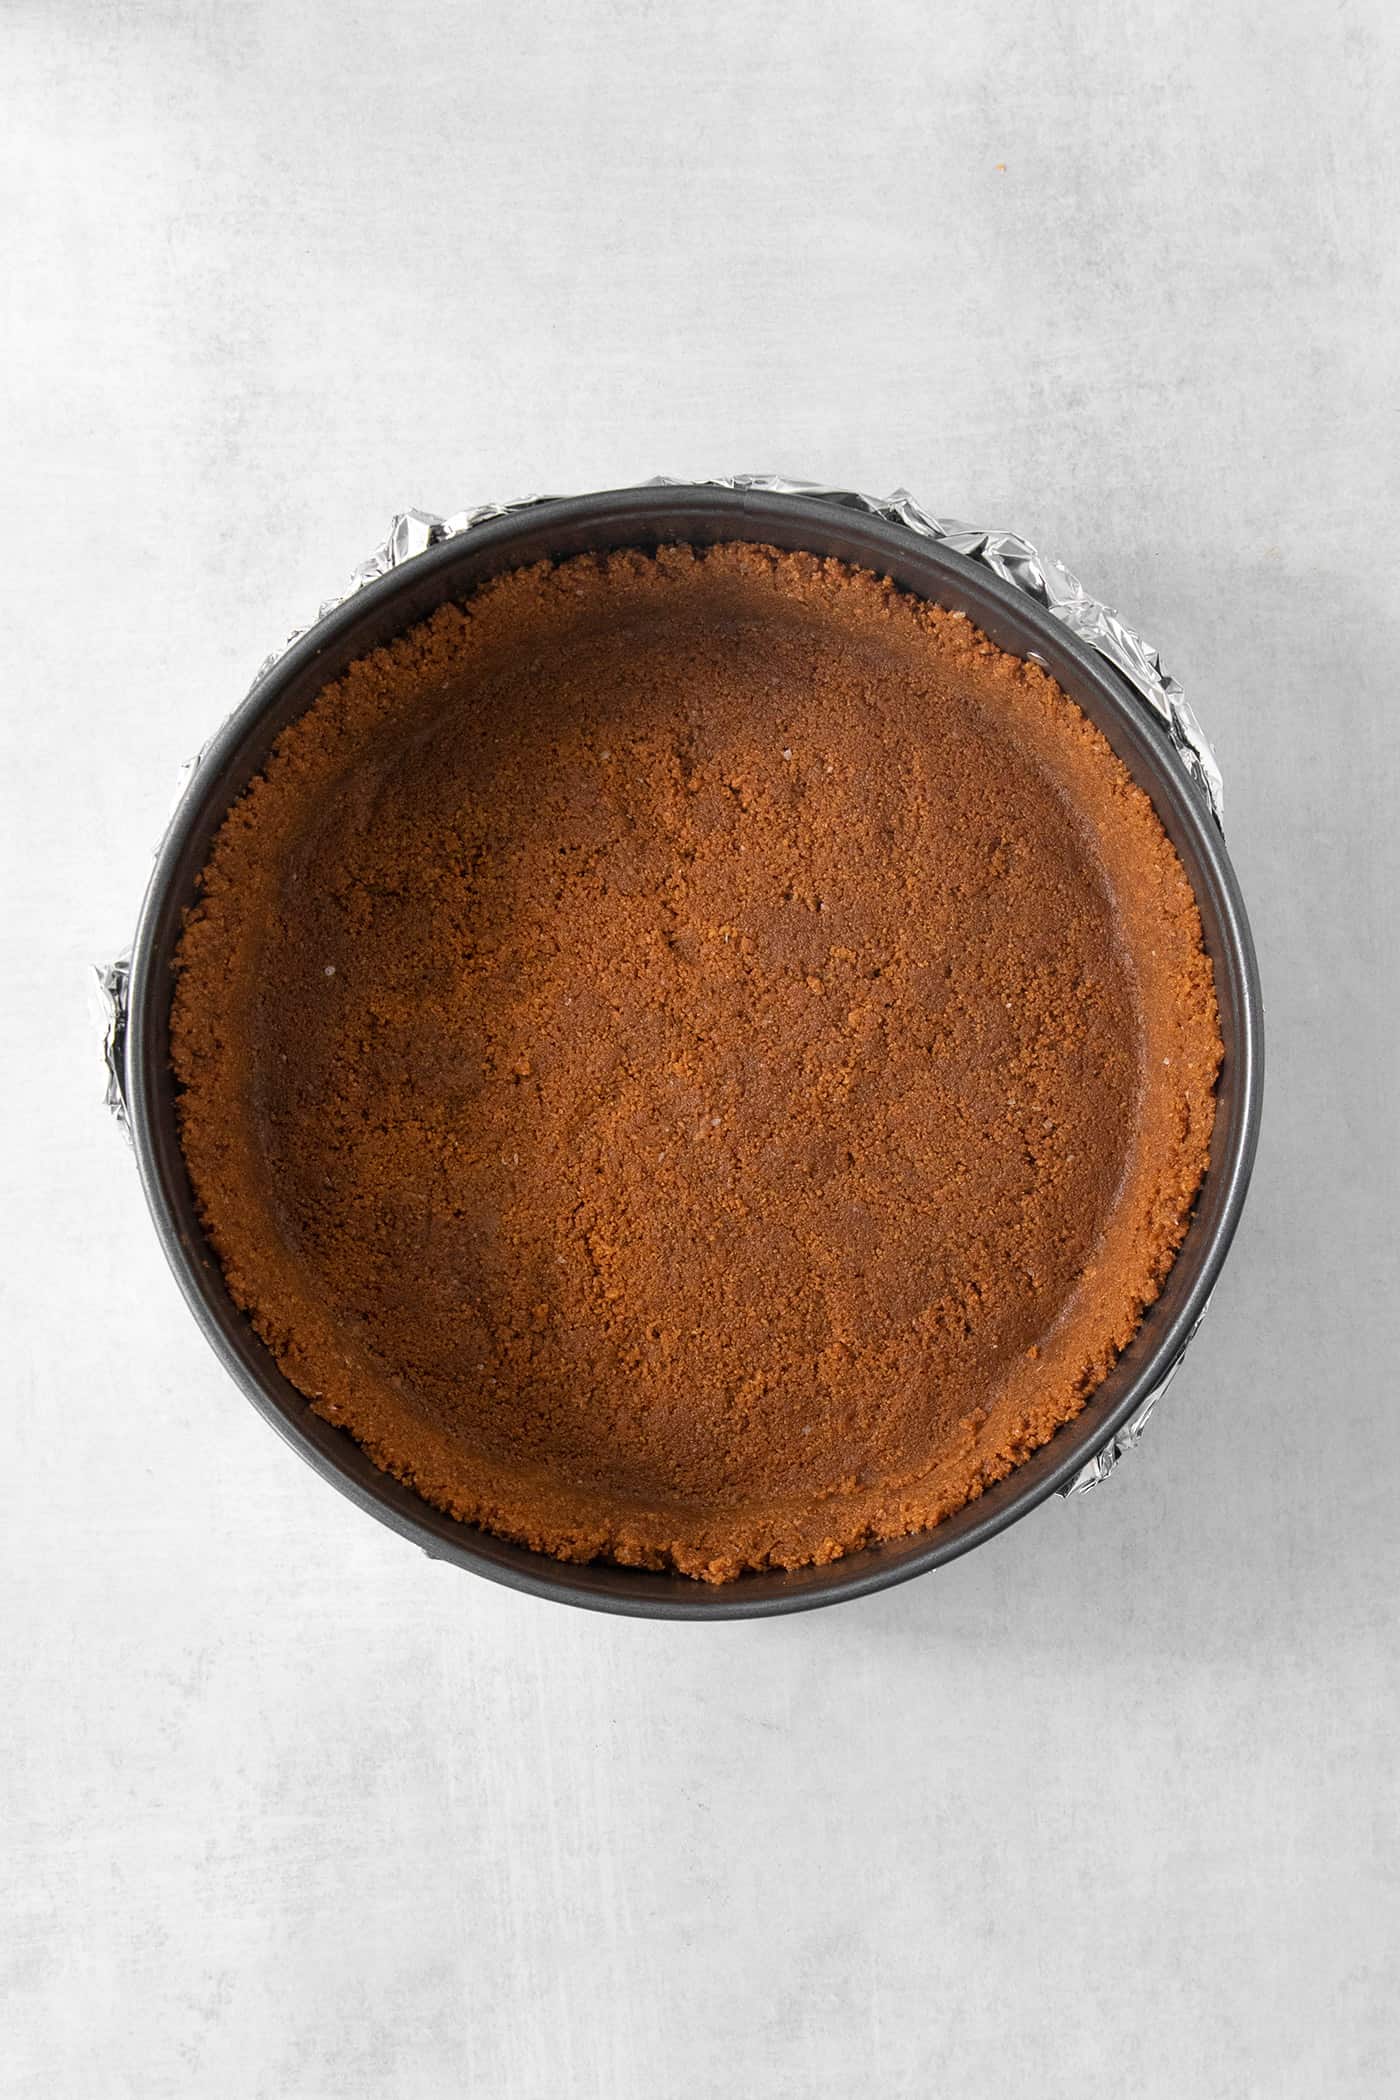 A biscoff cookie crust is shown in a springform pan.